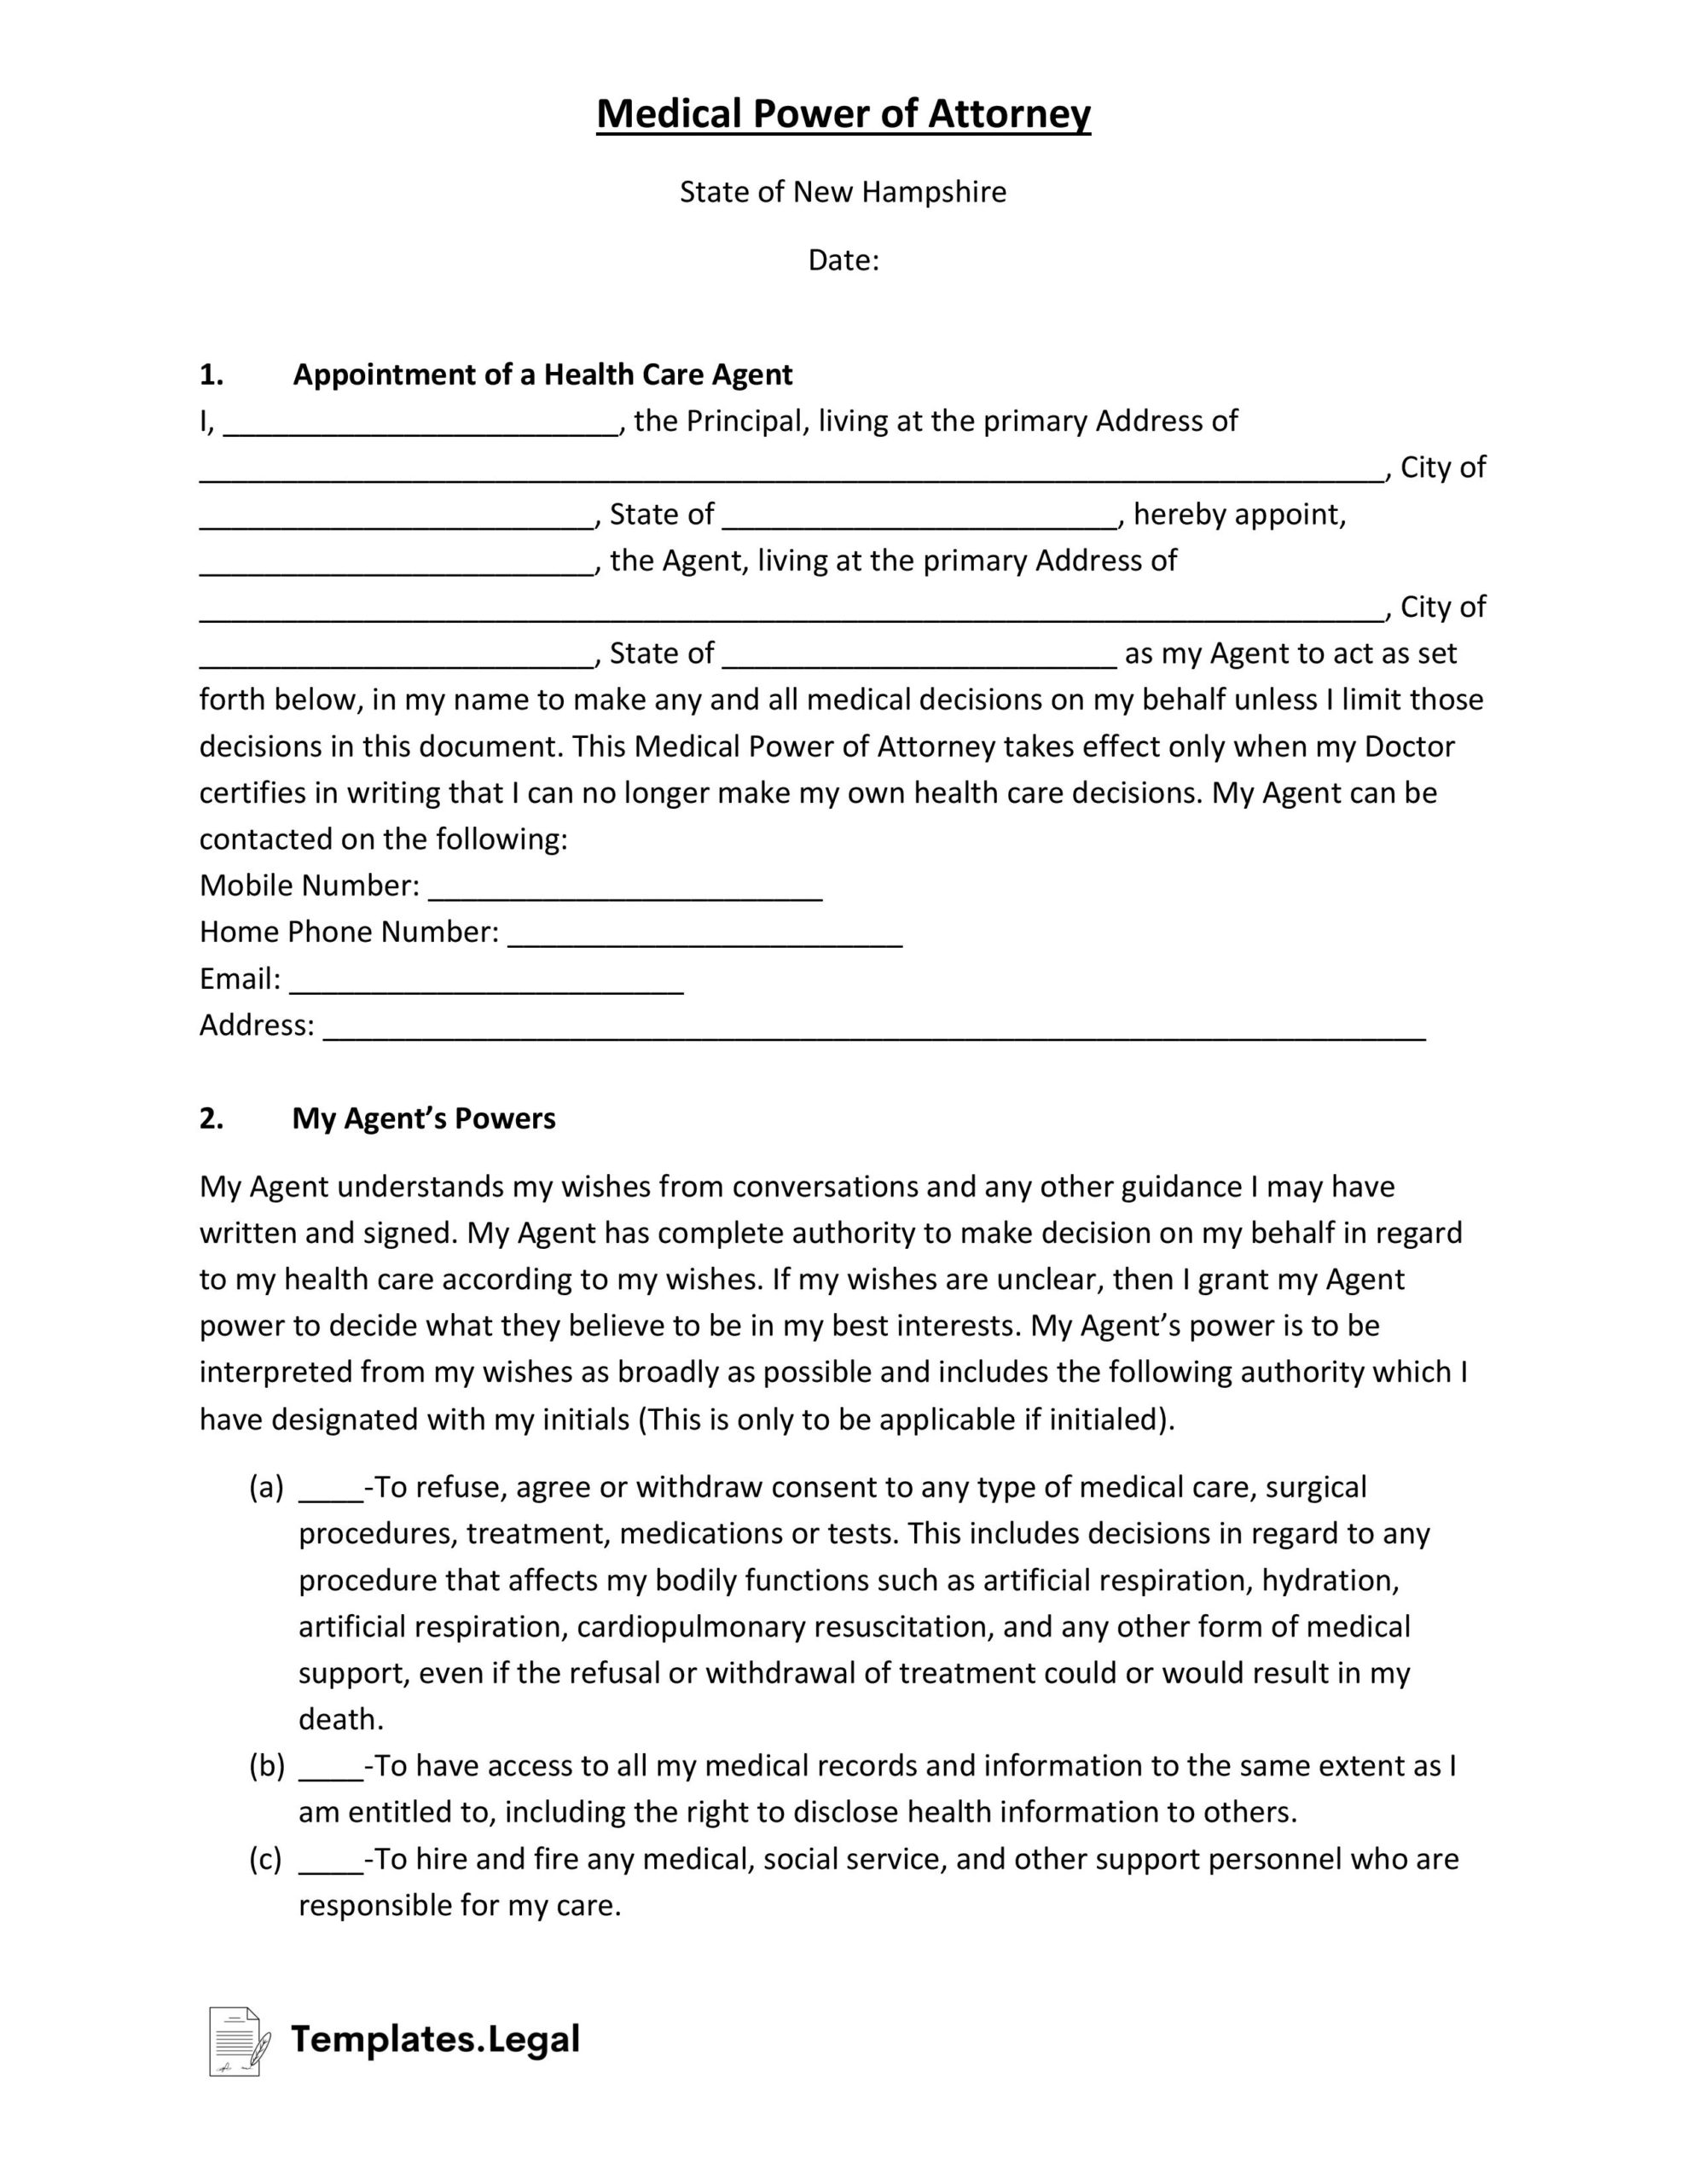 New Hampshire Medical Power of Attorney- Templates.Legal